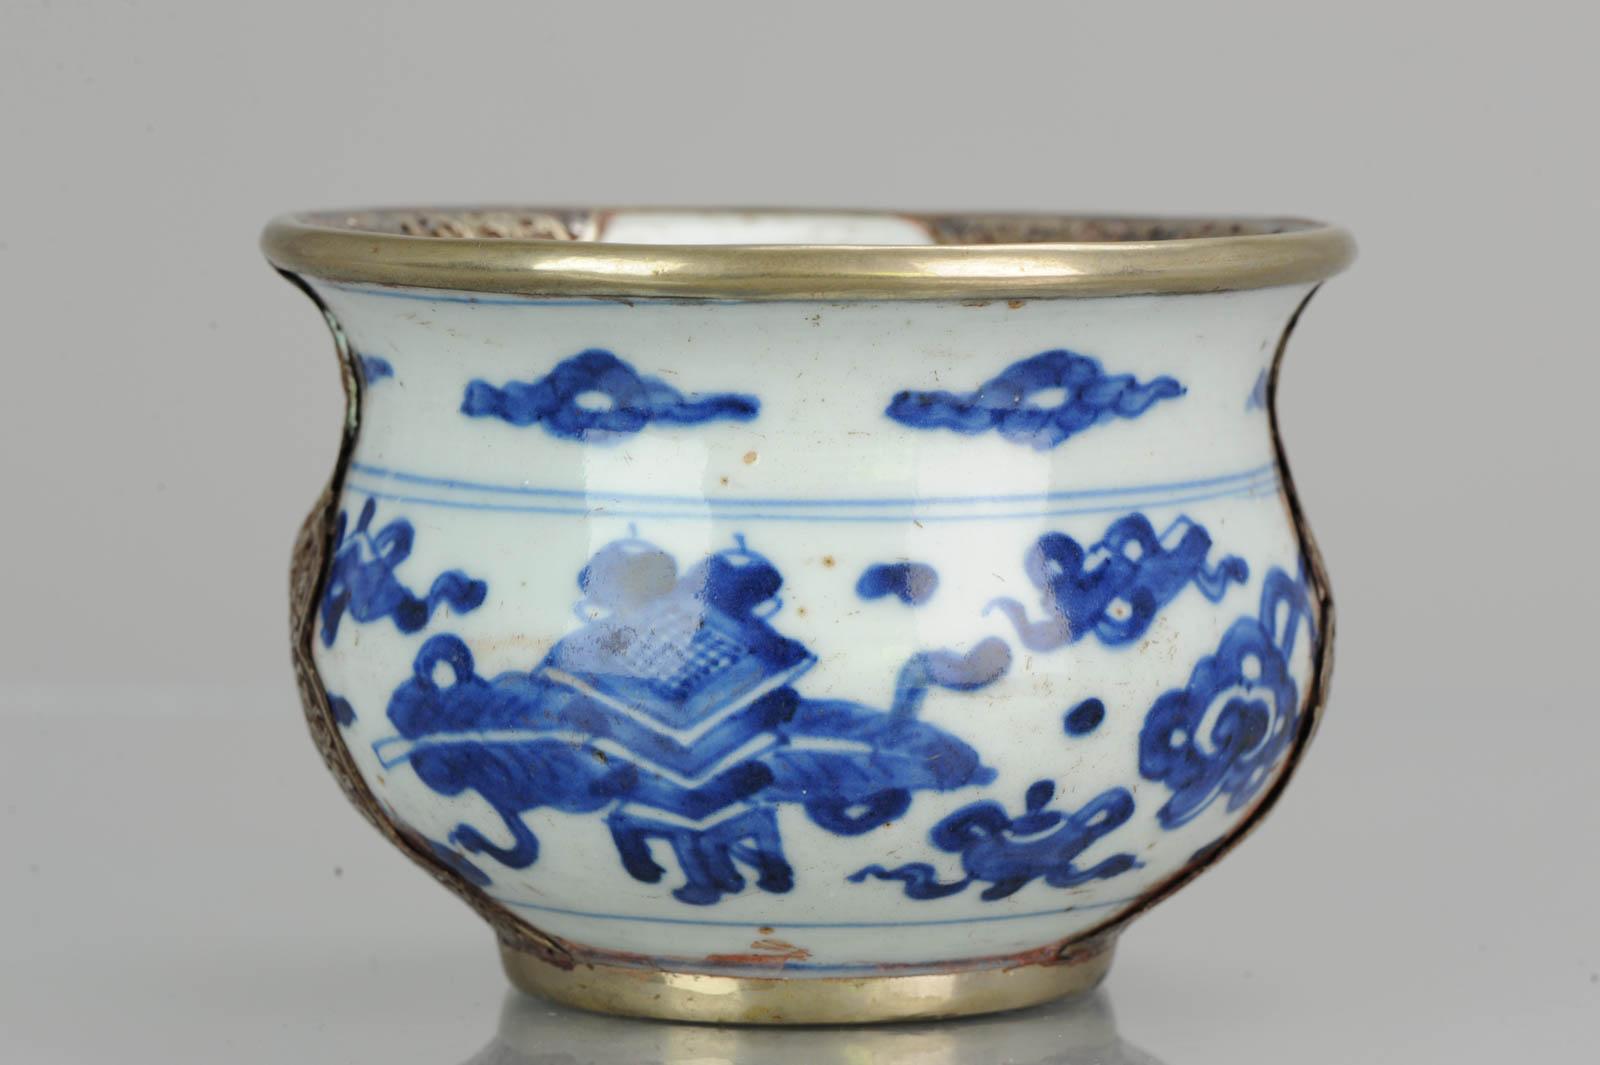  Rare 17th C Transitional Early Kangxi Chinese Porcelain China Bowl Objects For Sale 7